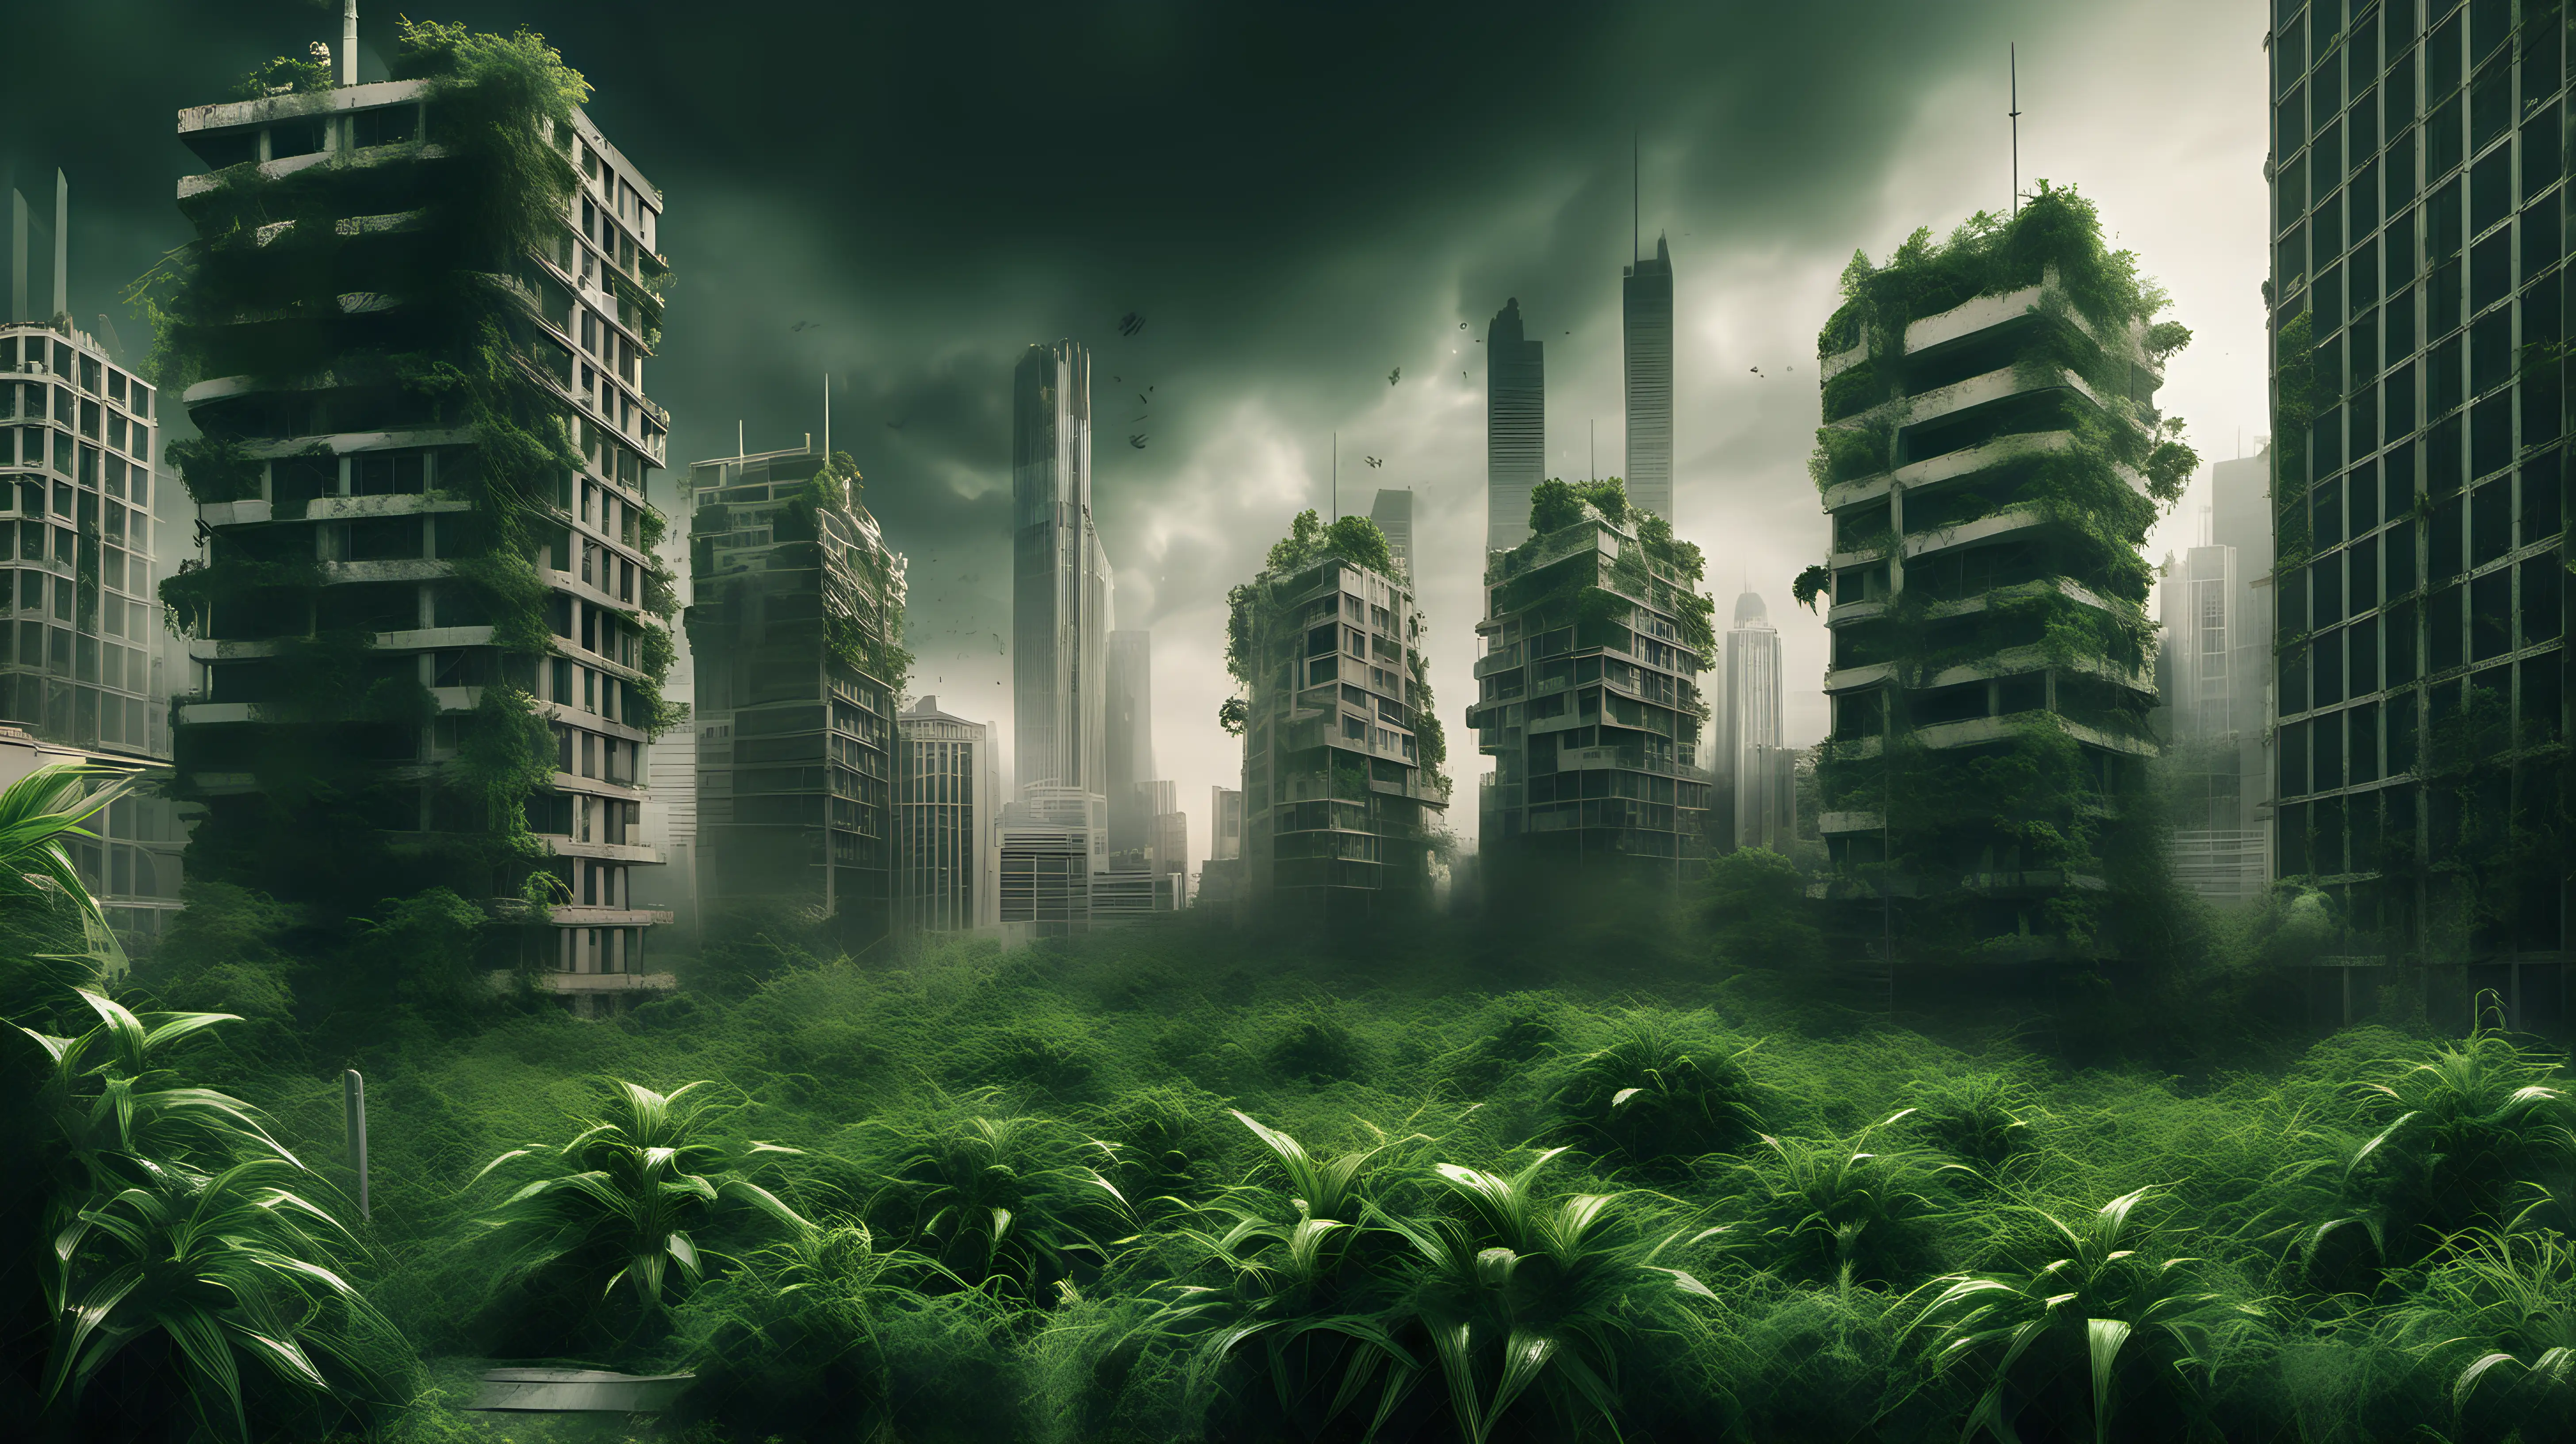 Apocalyptic Cityscape with Overgrown Plants